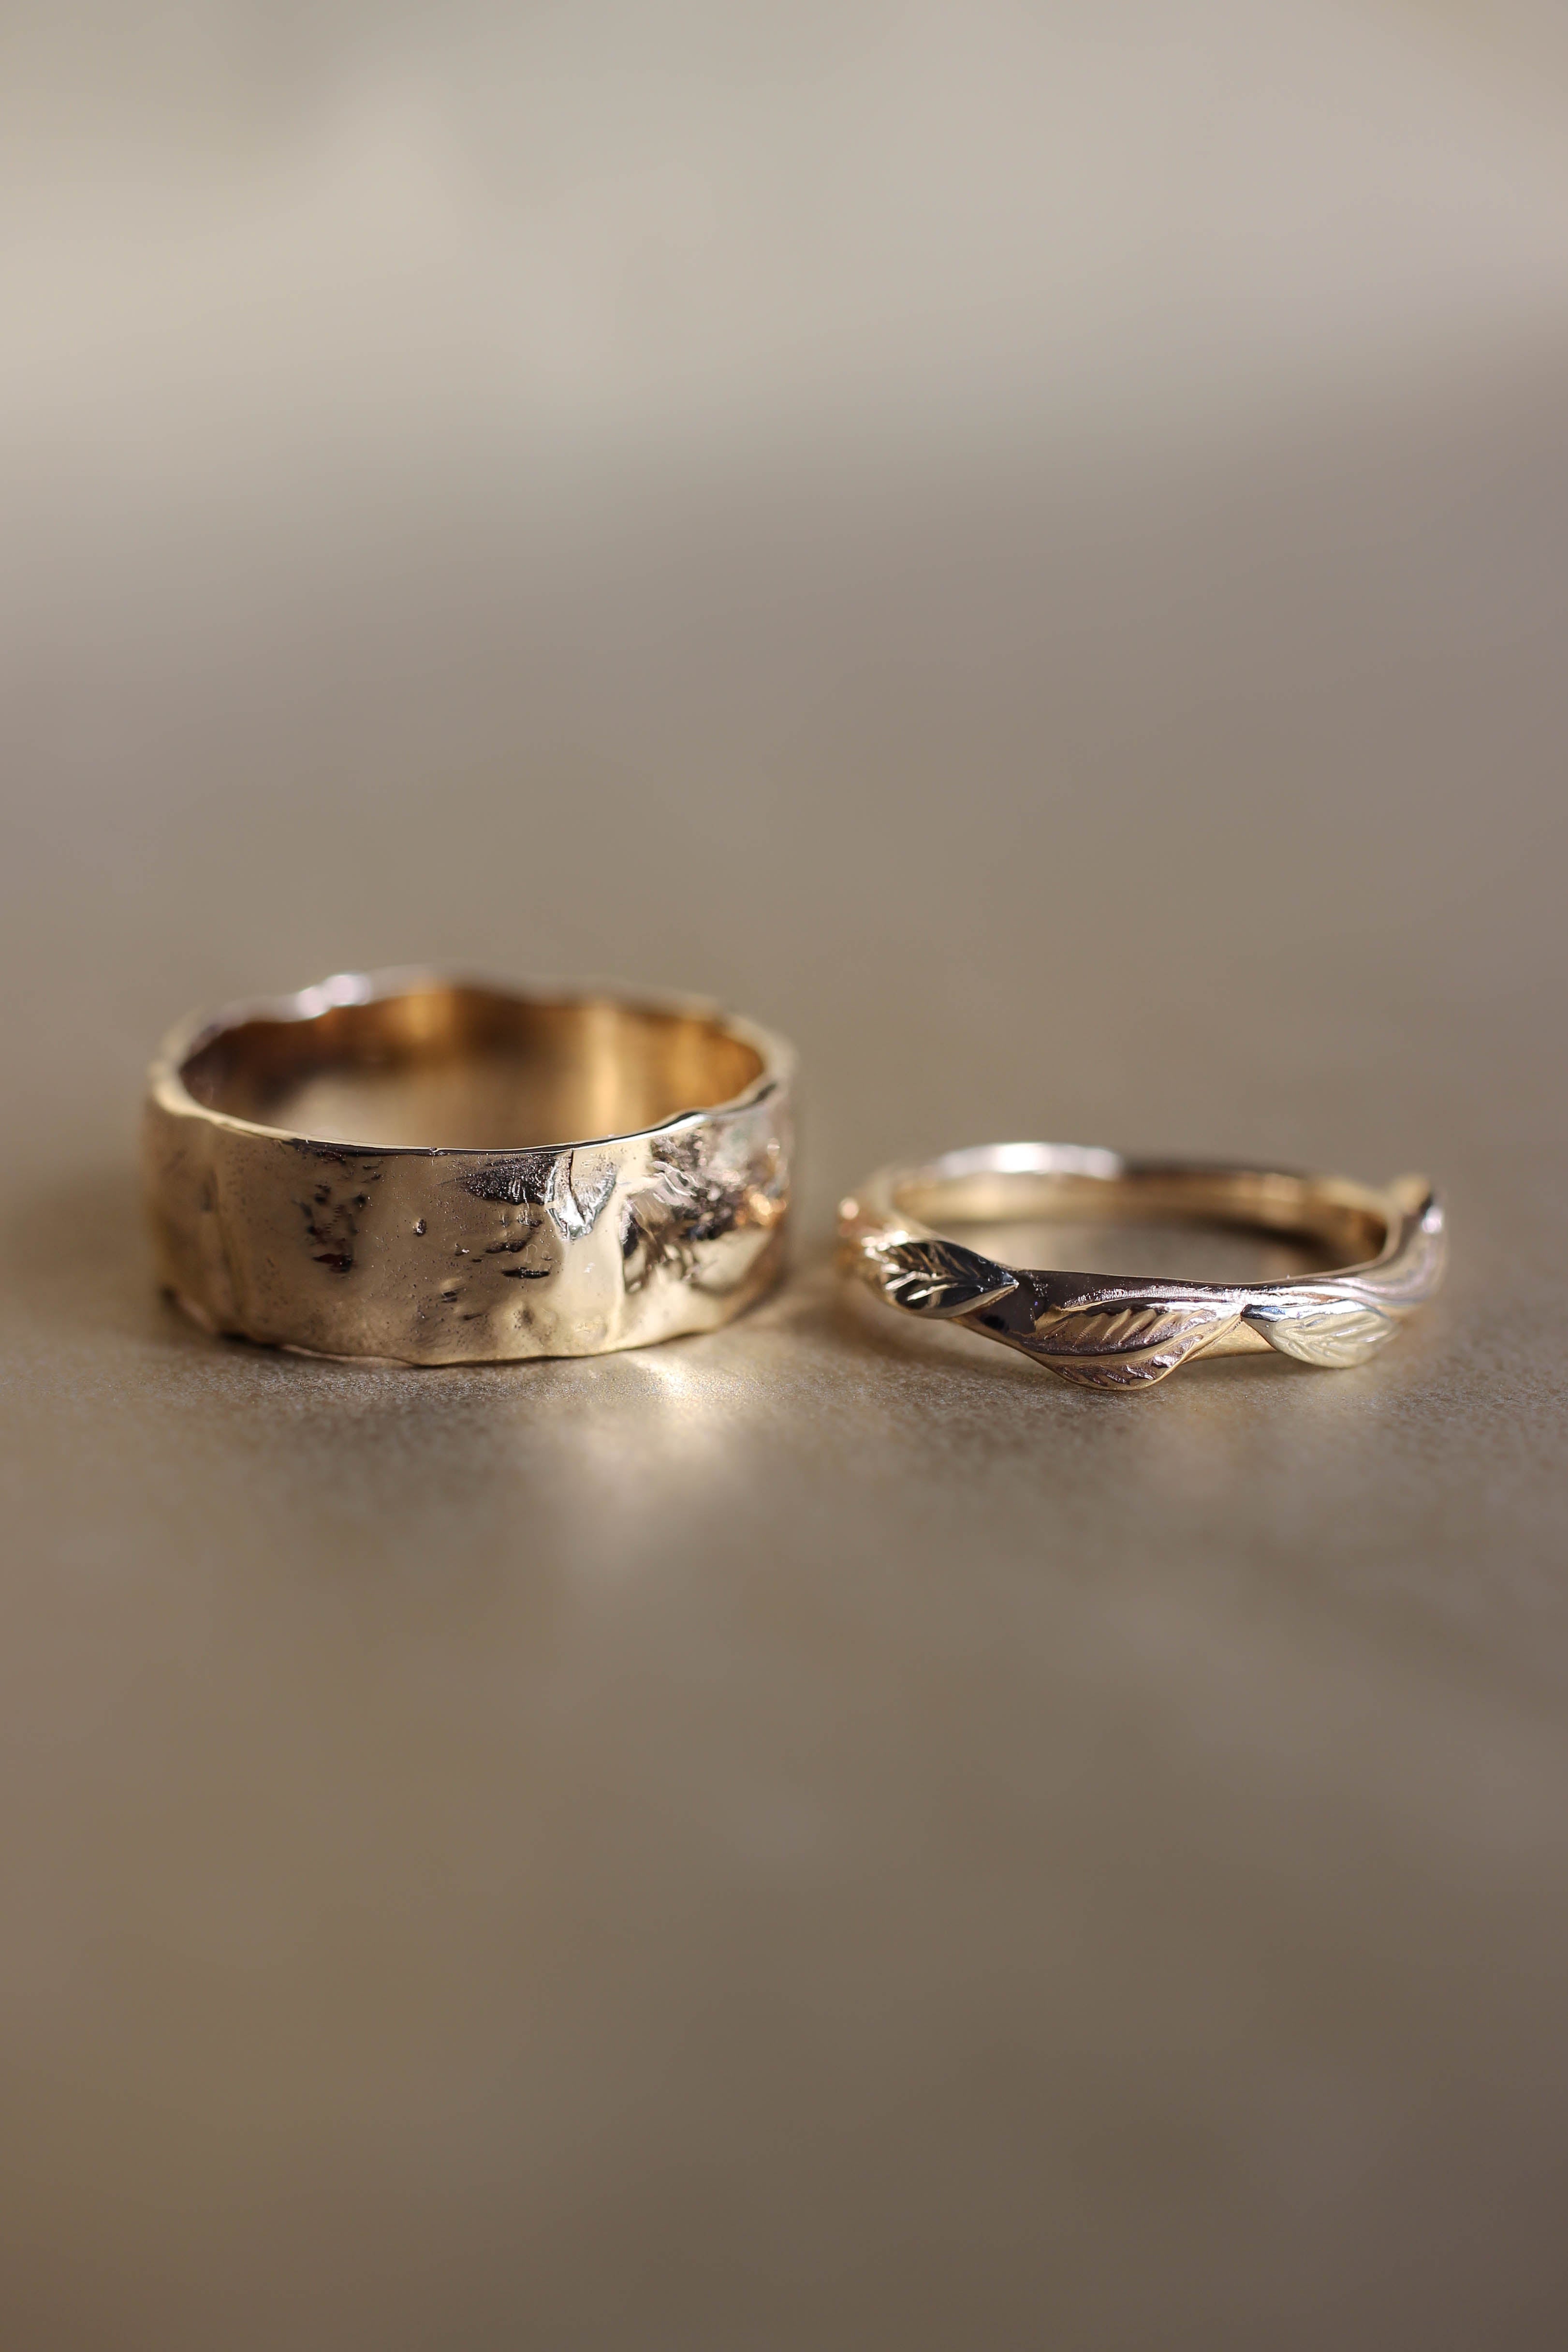 Bridal rings - Wedding rings and ornaments for men and women